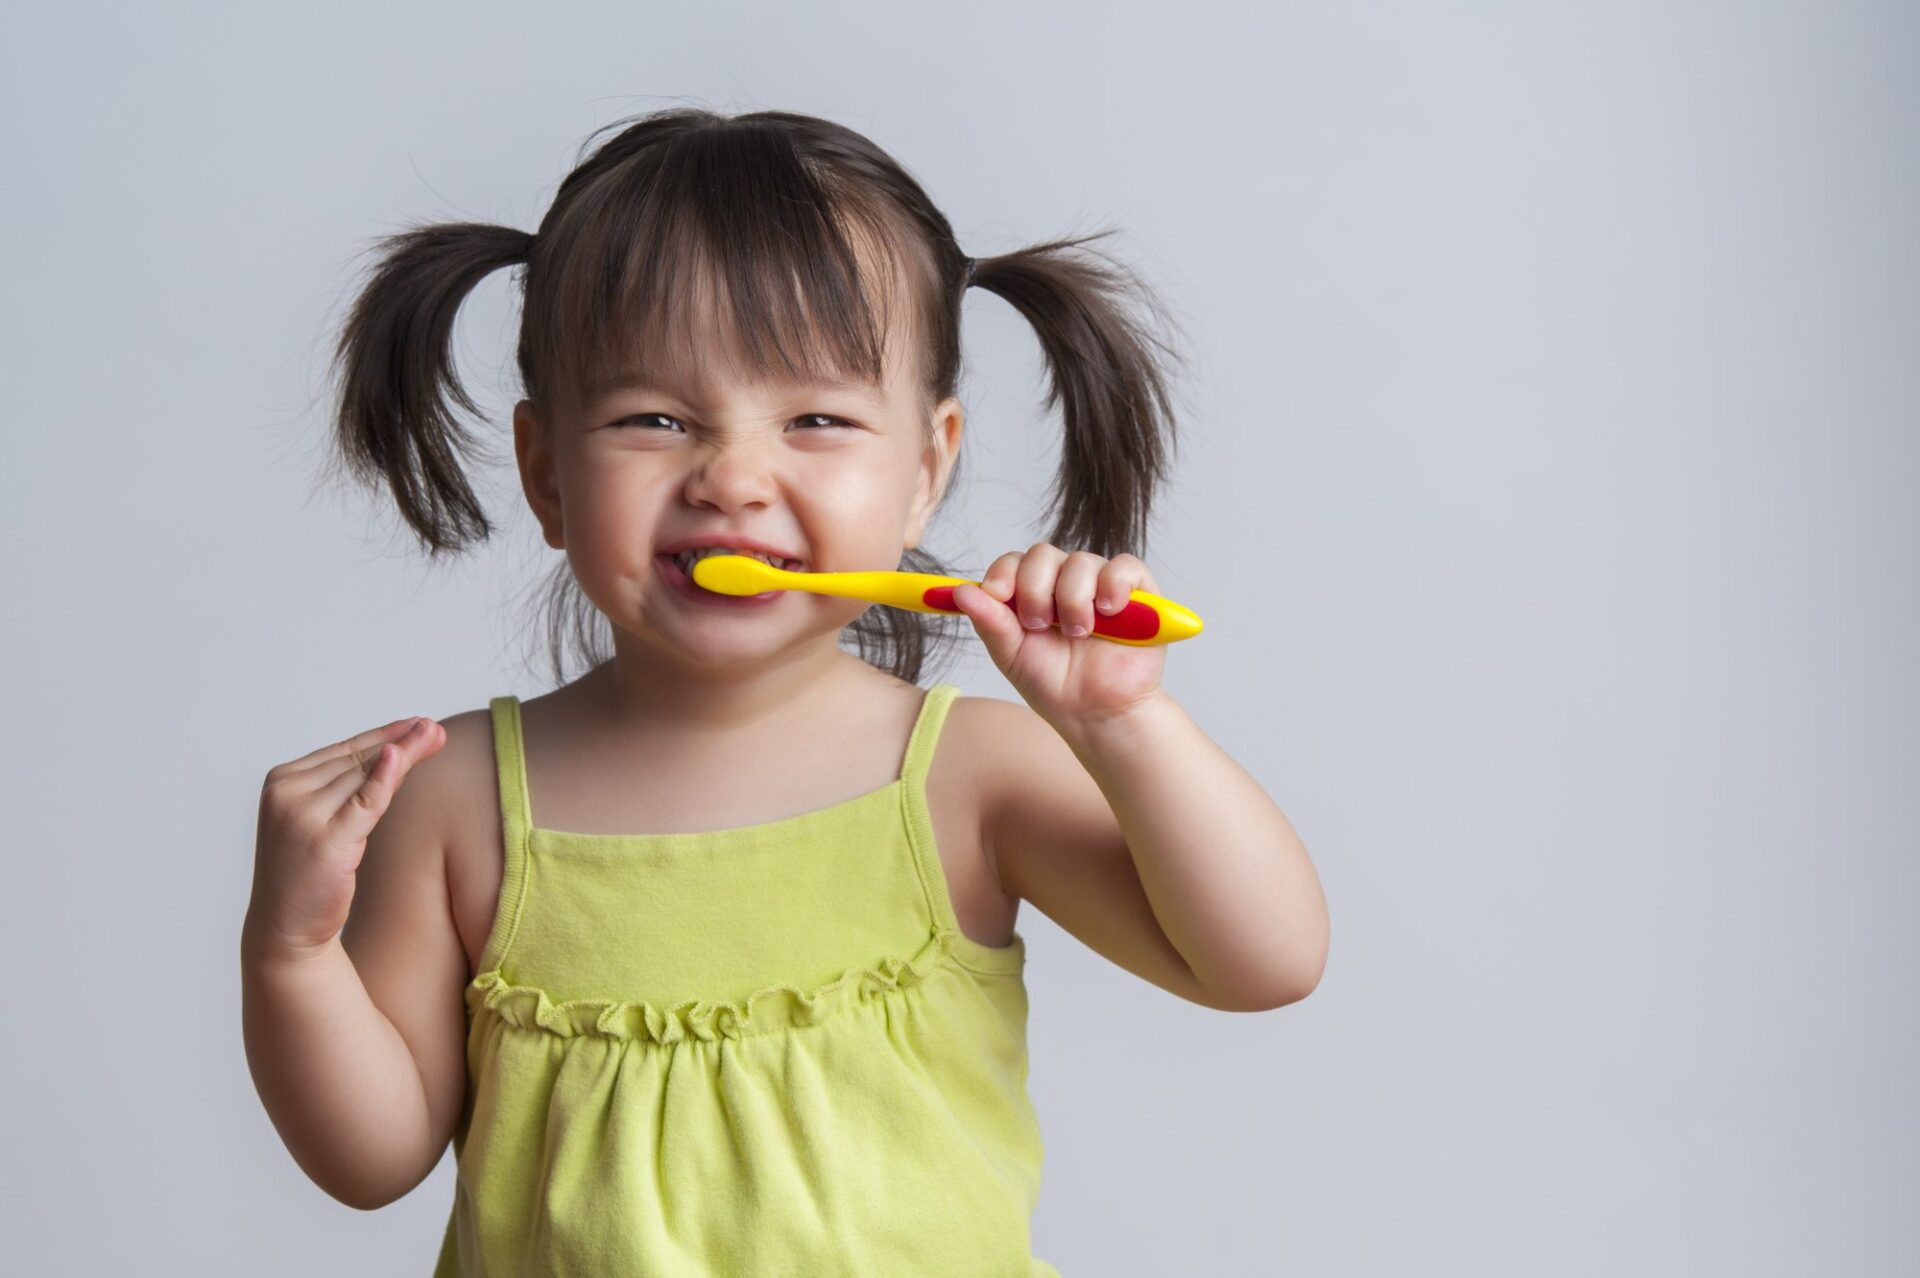 Building Healthy Smiles: Dental Care Tips for the Toddler Years